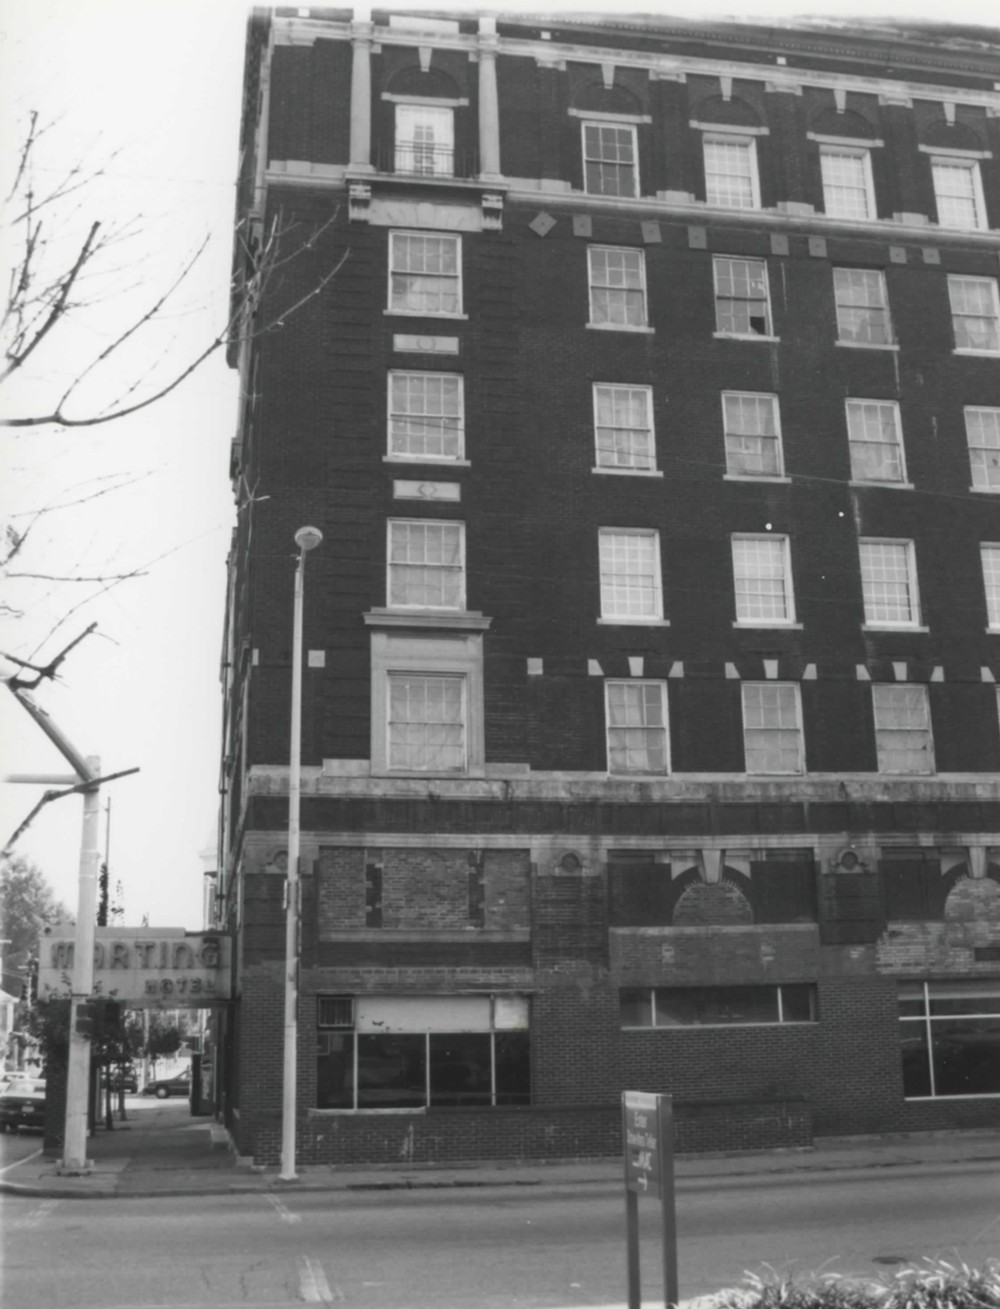 Marting Hotel, Ironton Ohio West elevation - north end without panels (1998)